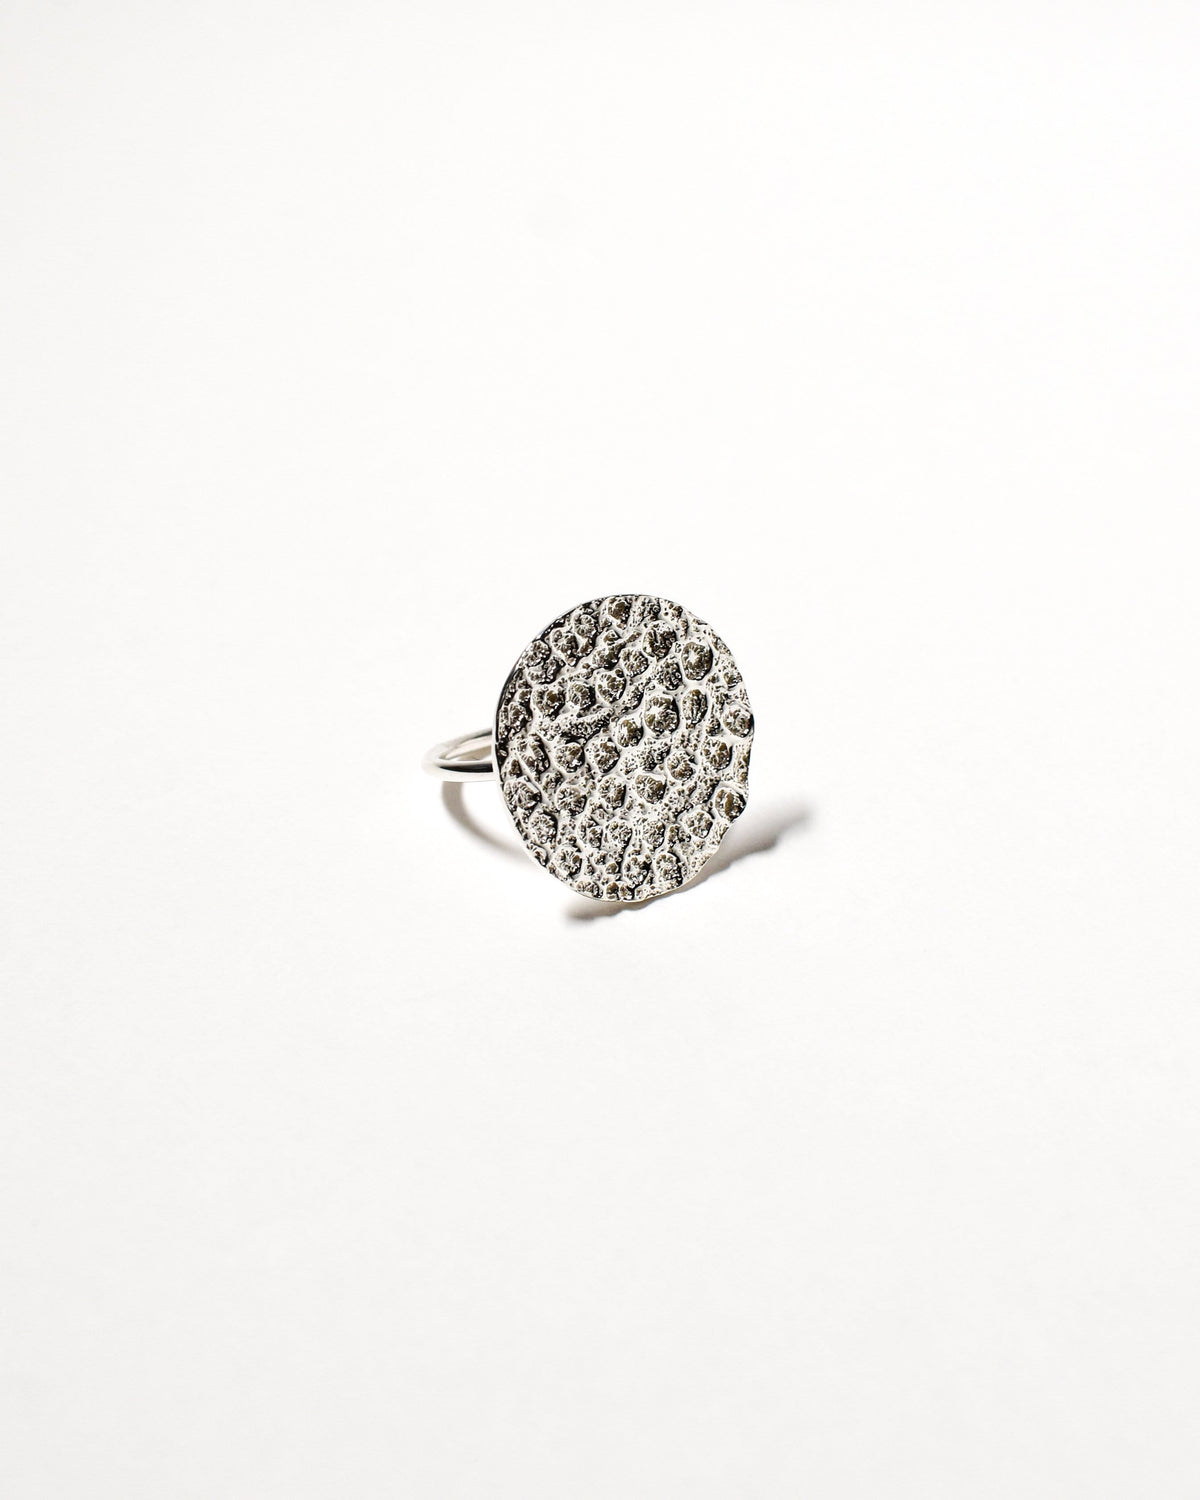 Marley Ring (Large), Sterling Silver